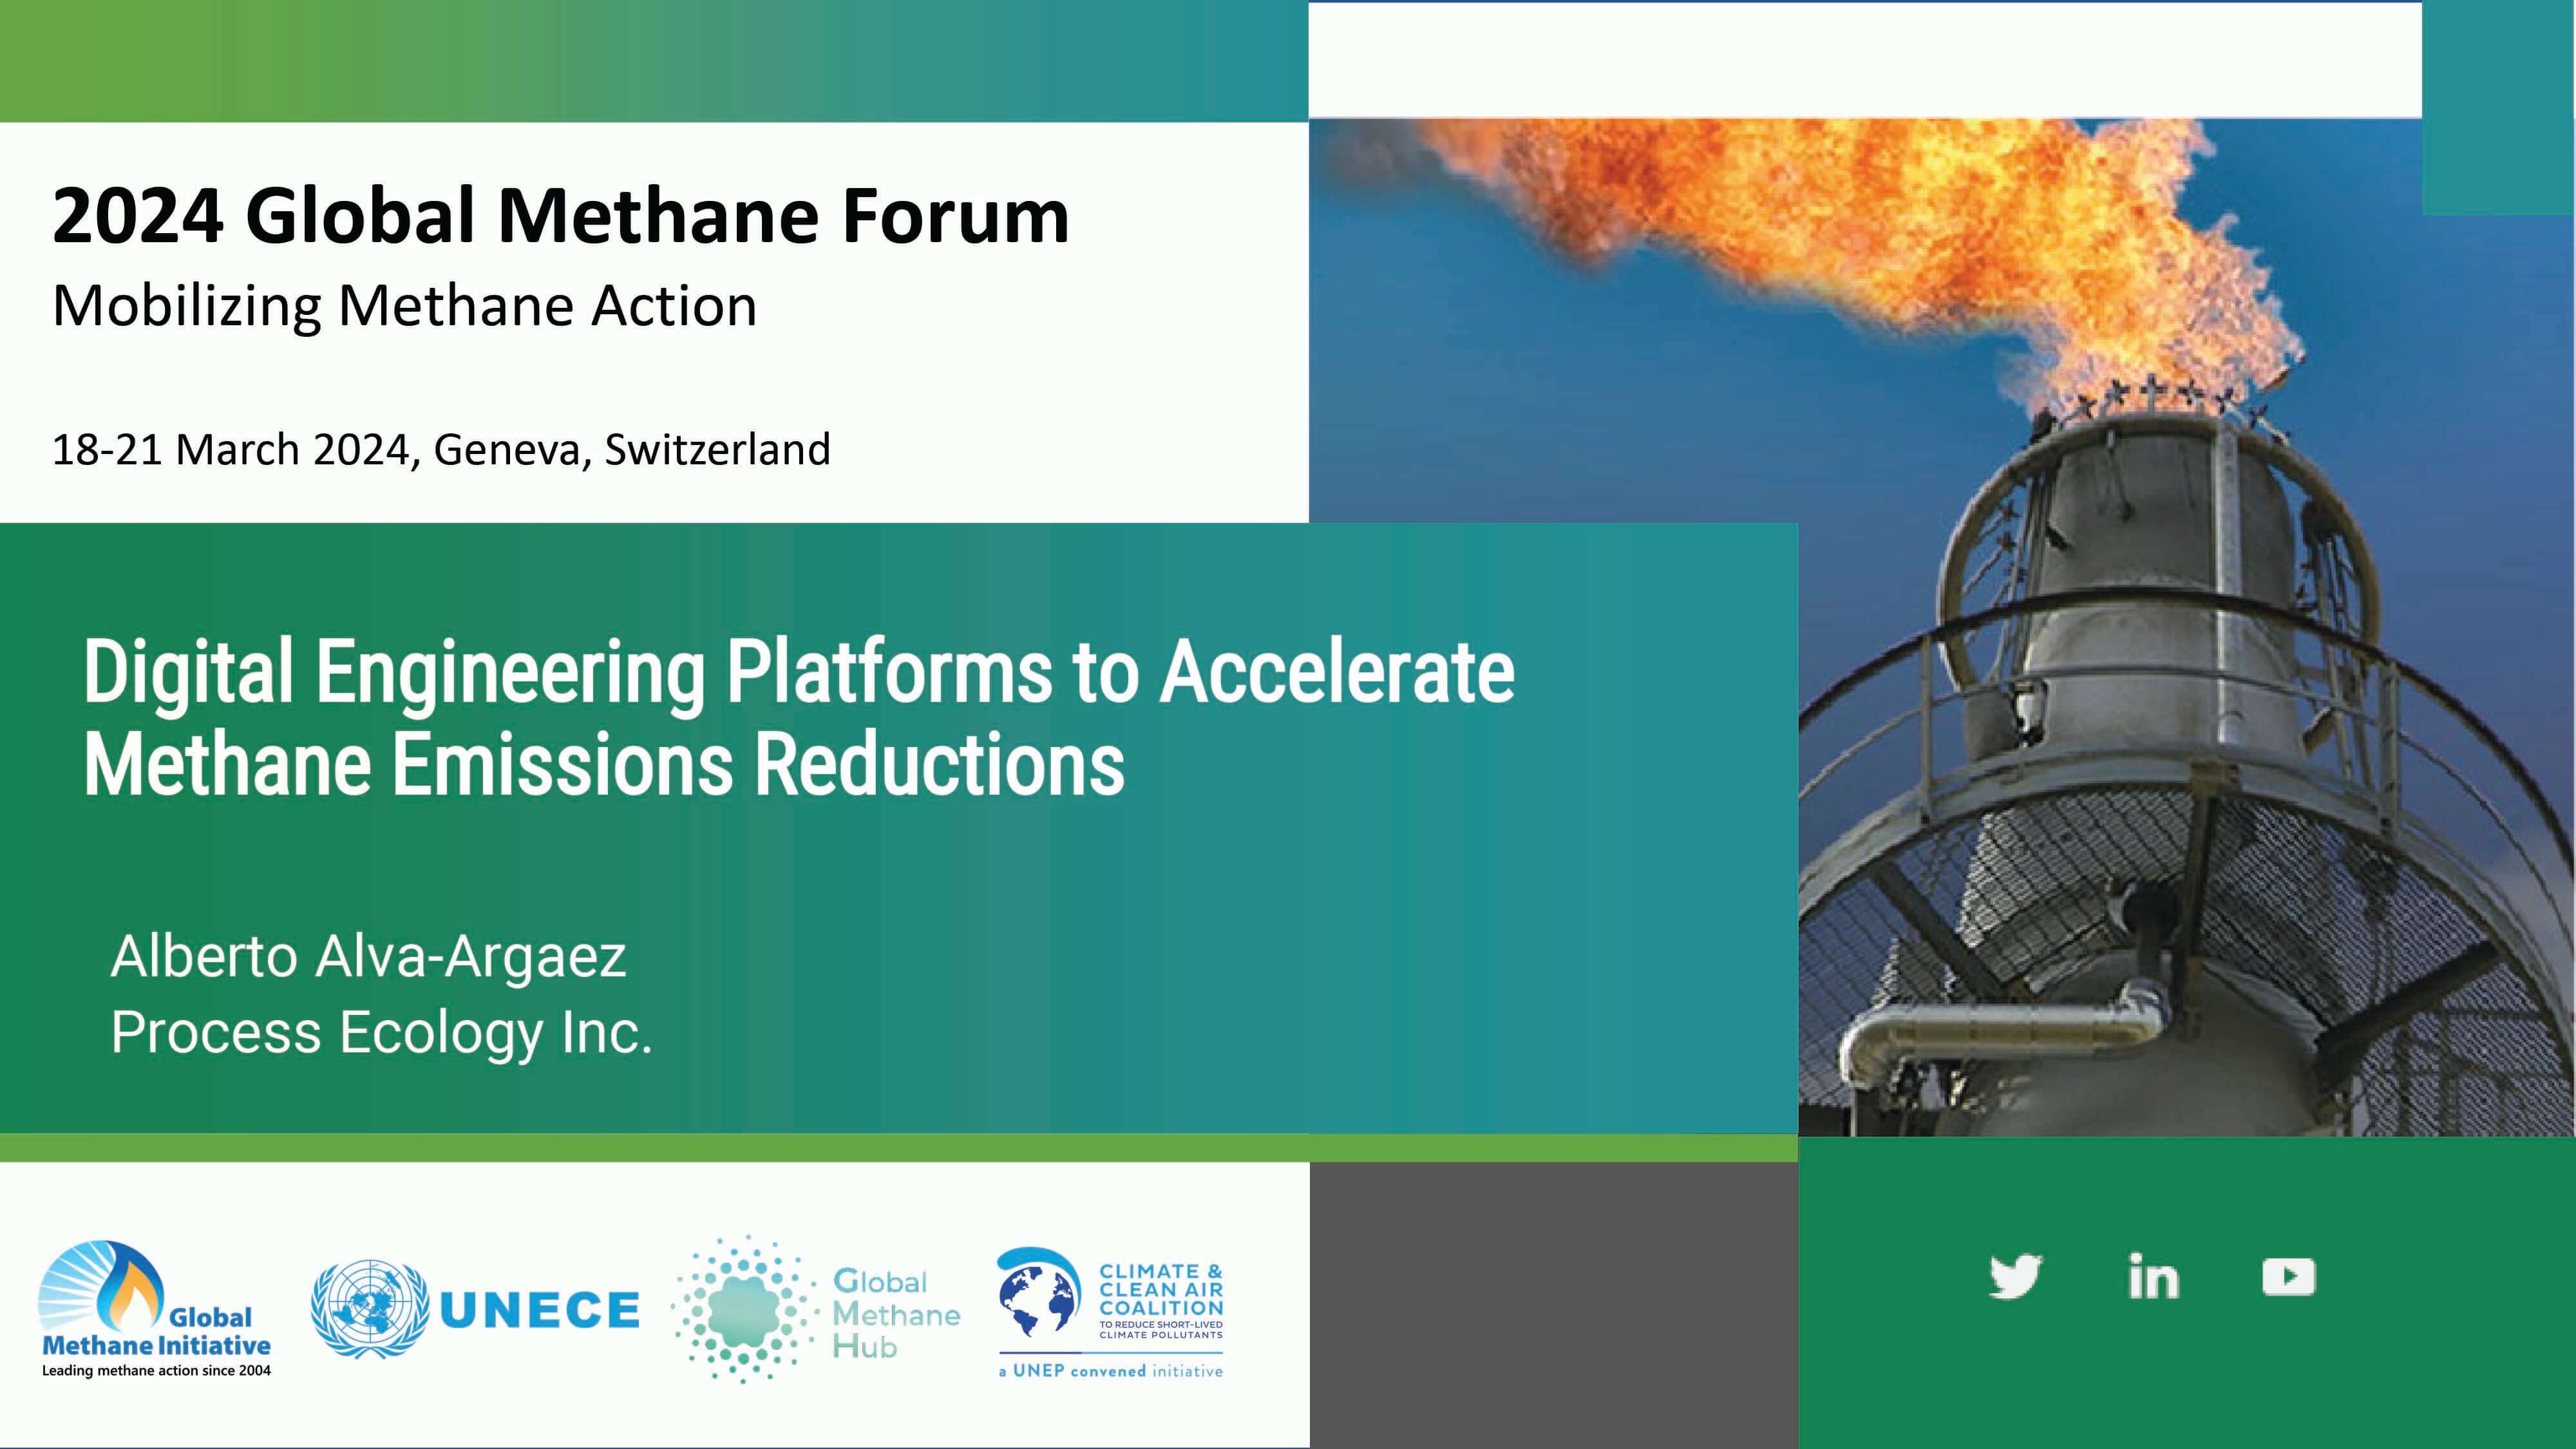 Digital Engineering Platforms to Accelerate Methane Emissions Reductions